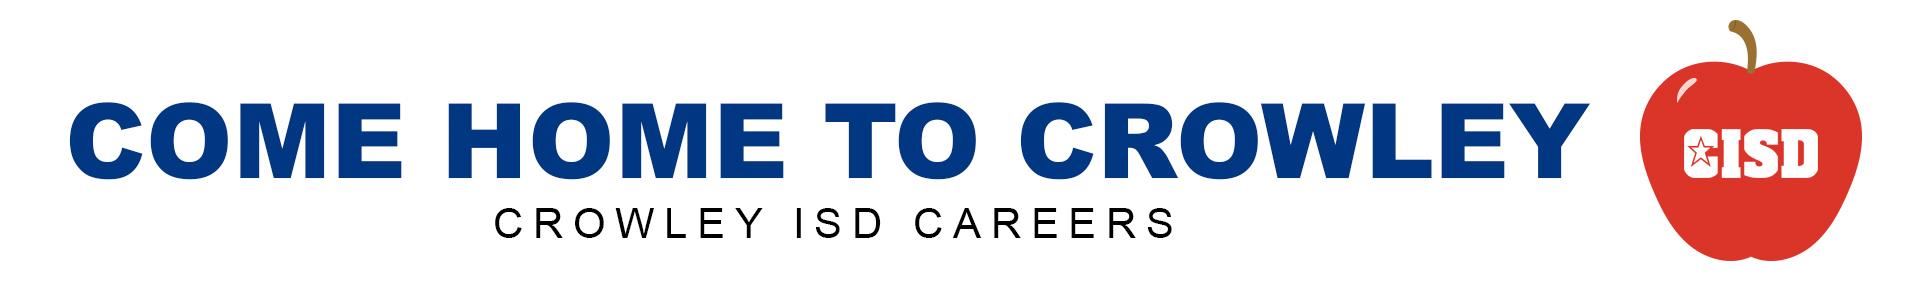 Come Home To Crowley - Crowley ISD Careers 